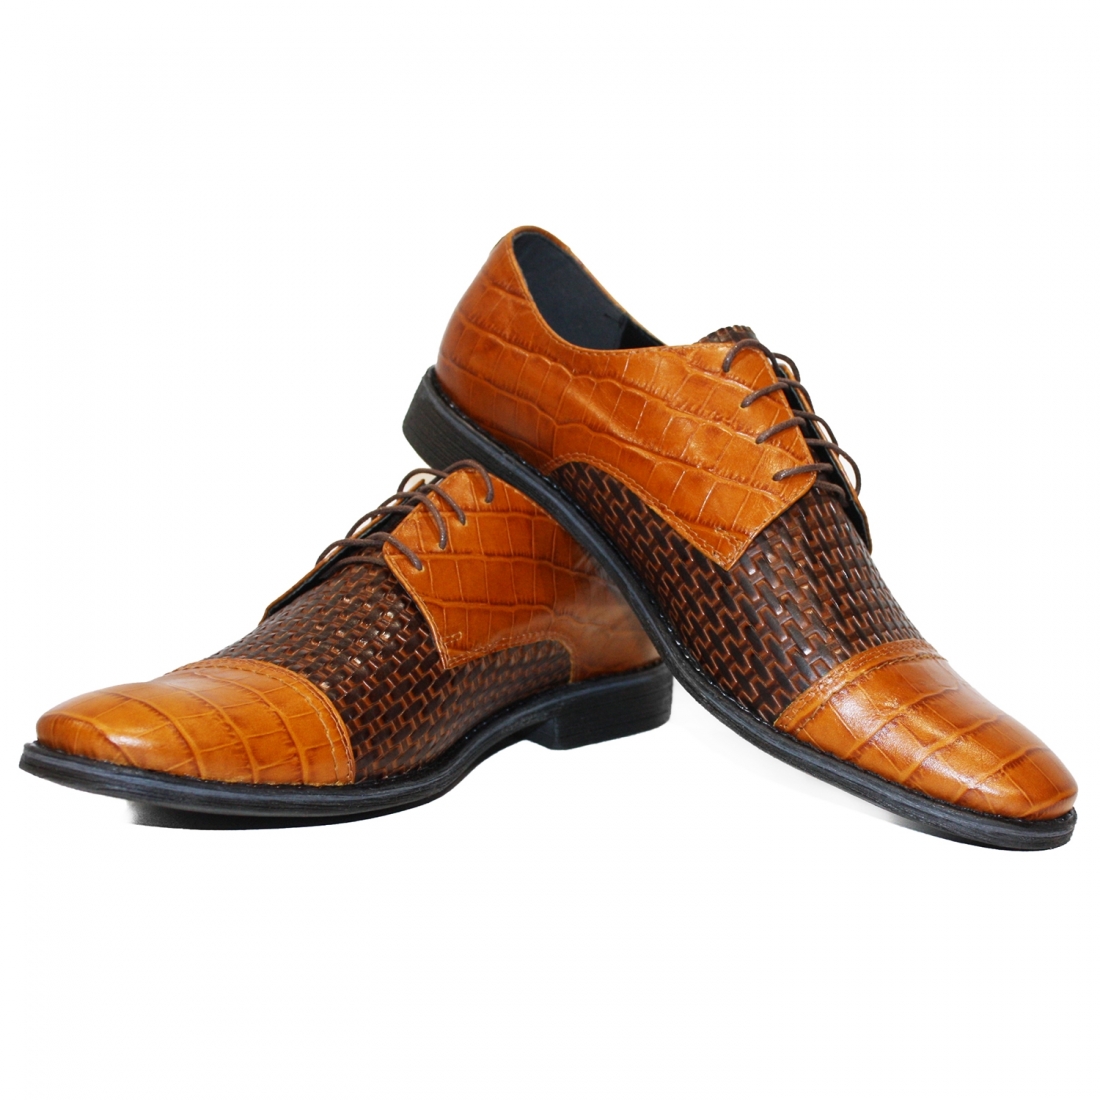 Modello Gutersso - Classic Shoes - Handmade Colorful Italian Leather Shoes